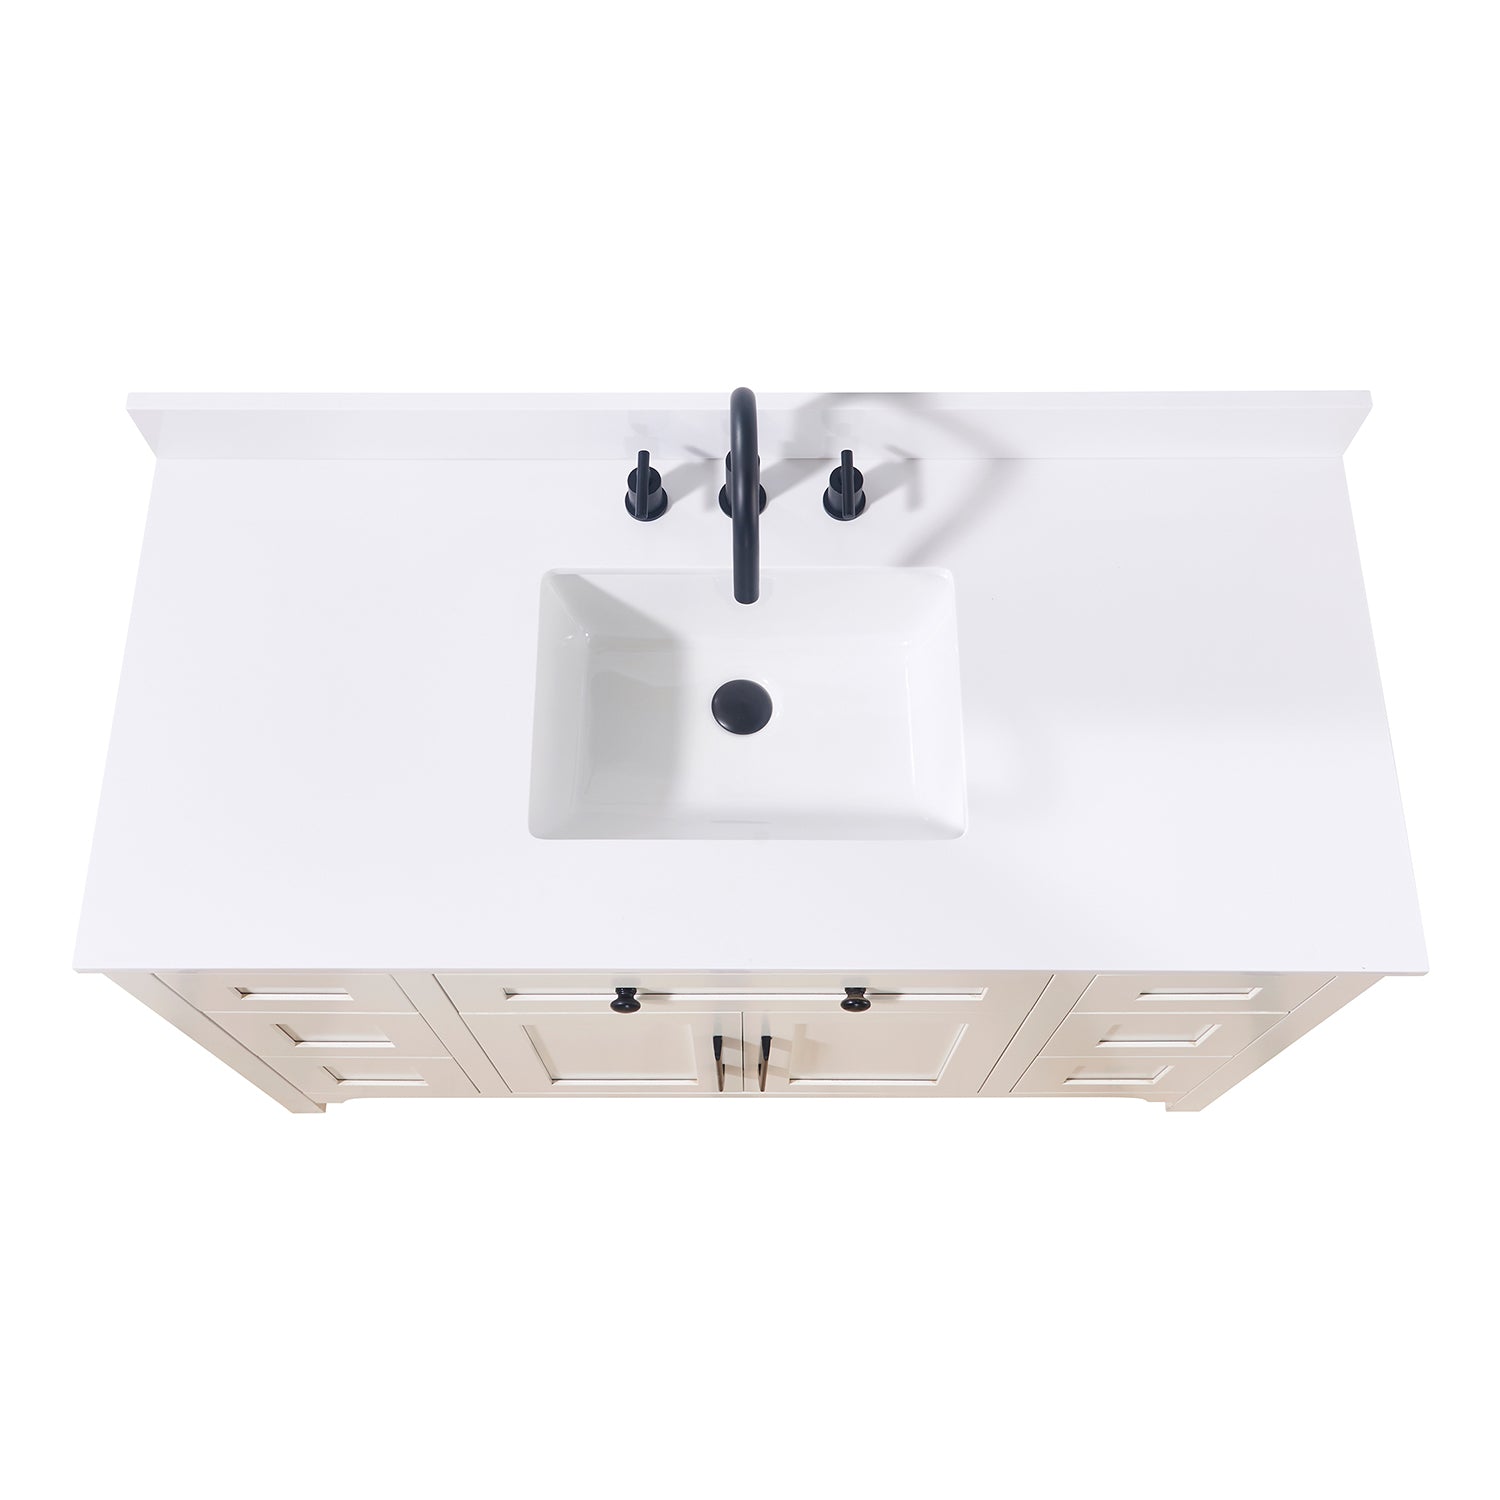 Andalo Stone effects Single Sink Vanity Top in Snow White with White Sink